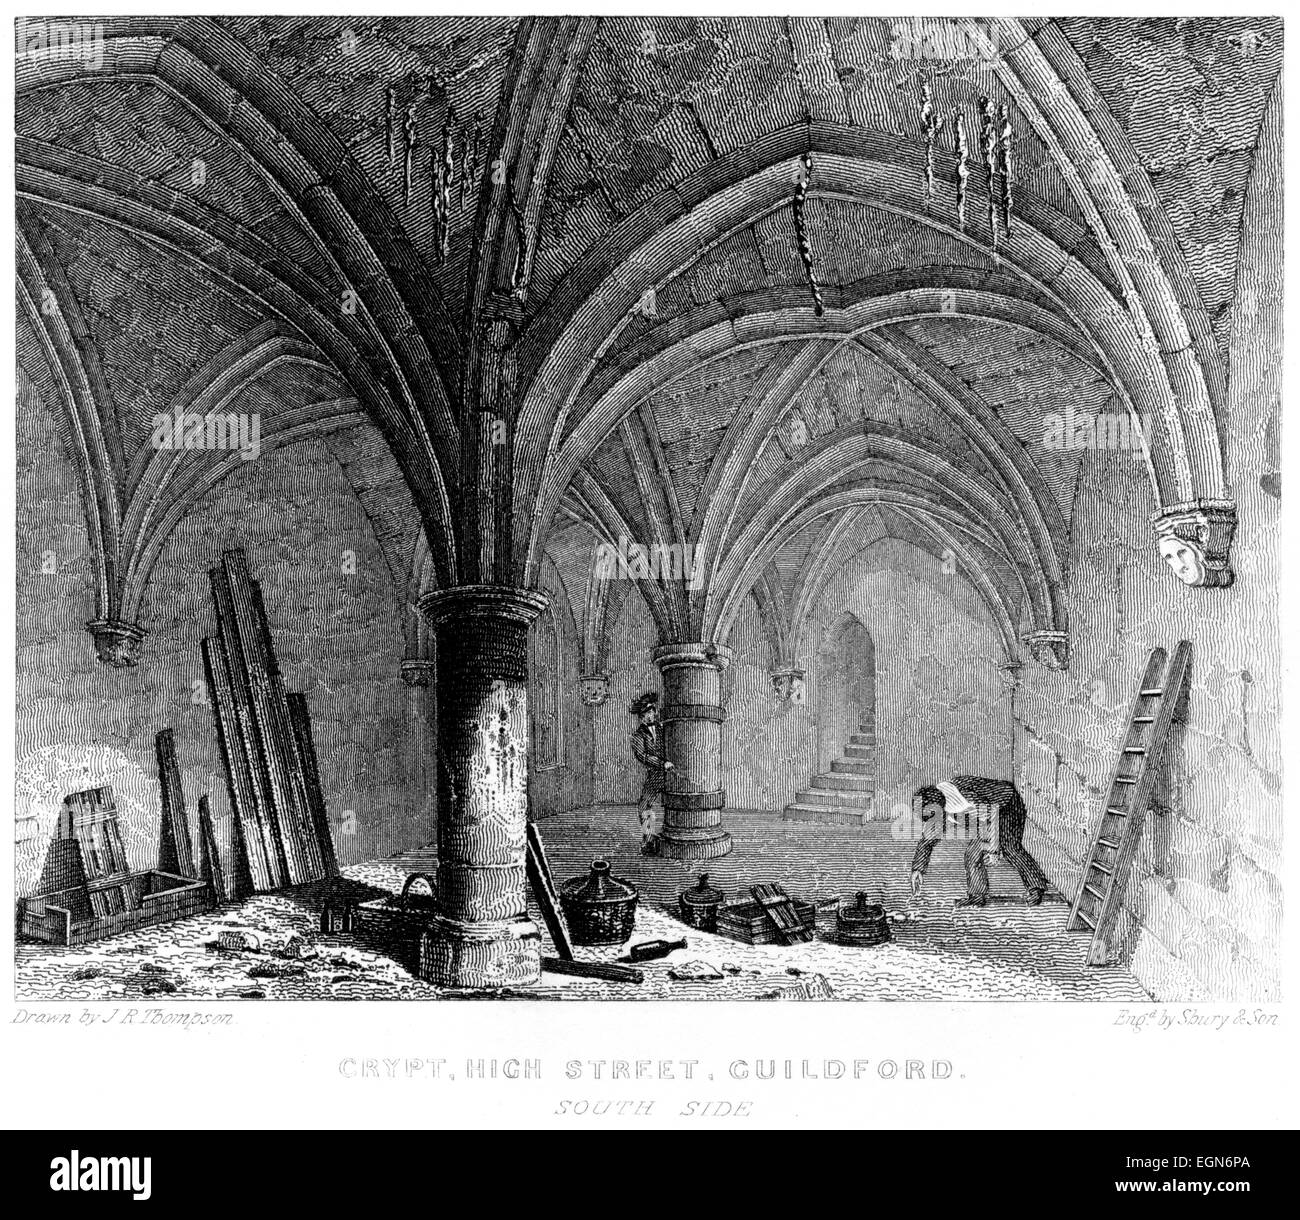 Engraving of The Crypt (Undercroft) High Street, Guildford - South Side, Surrey scanned at high res from a book printed in 1850. Stock Photo